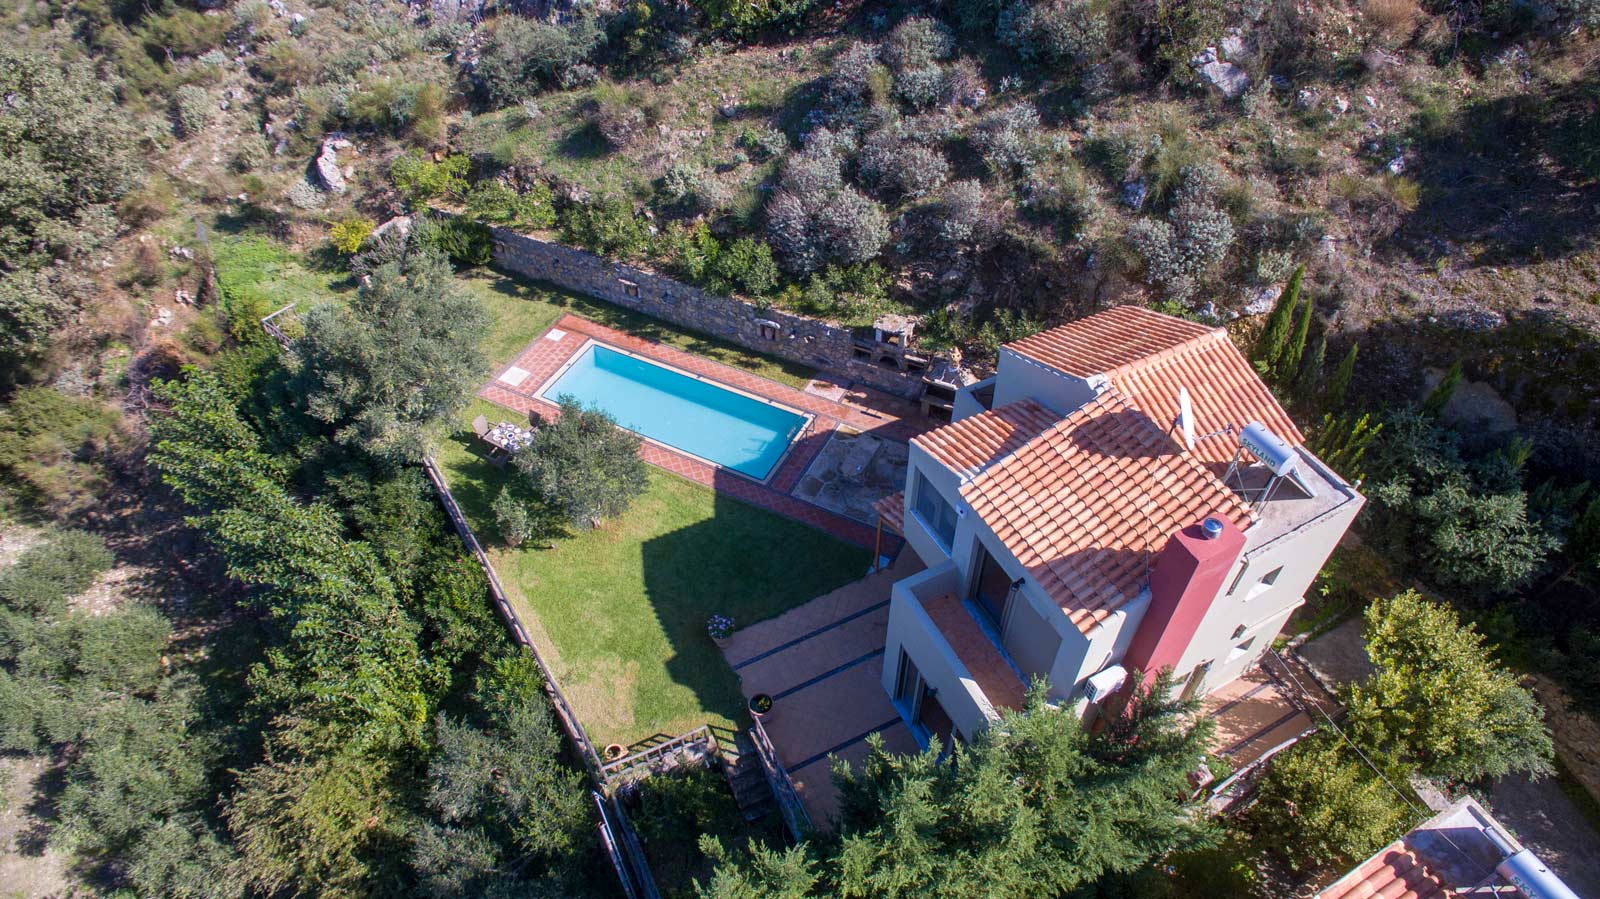 Villa from above